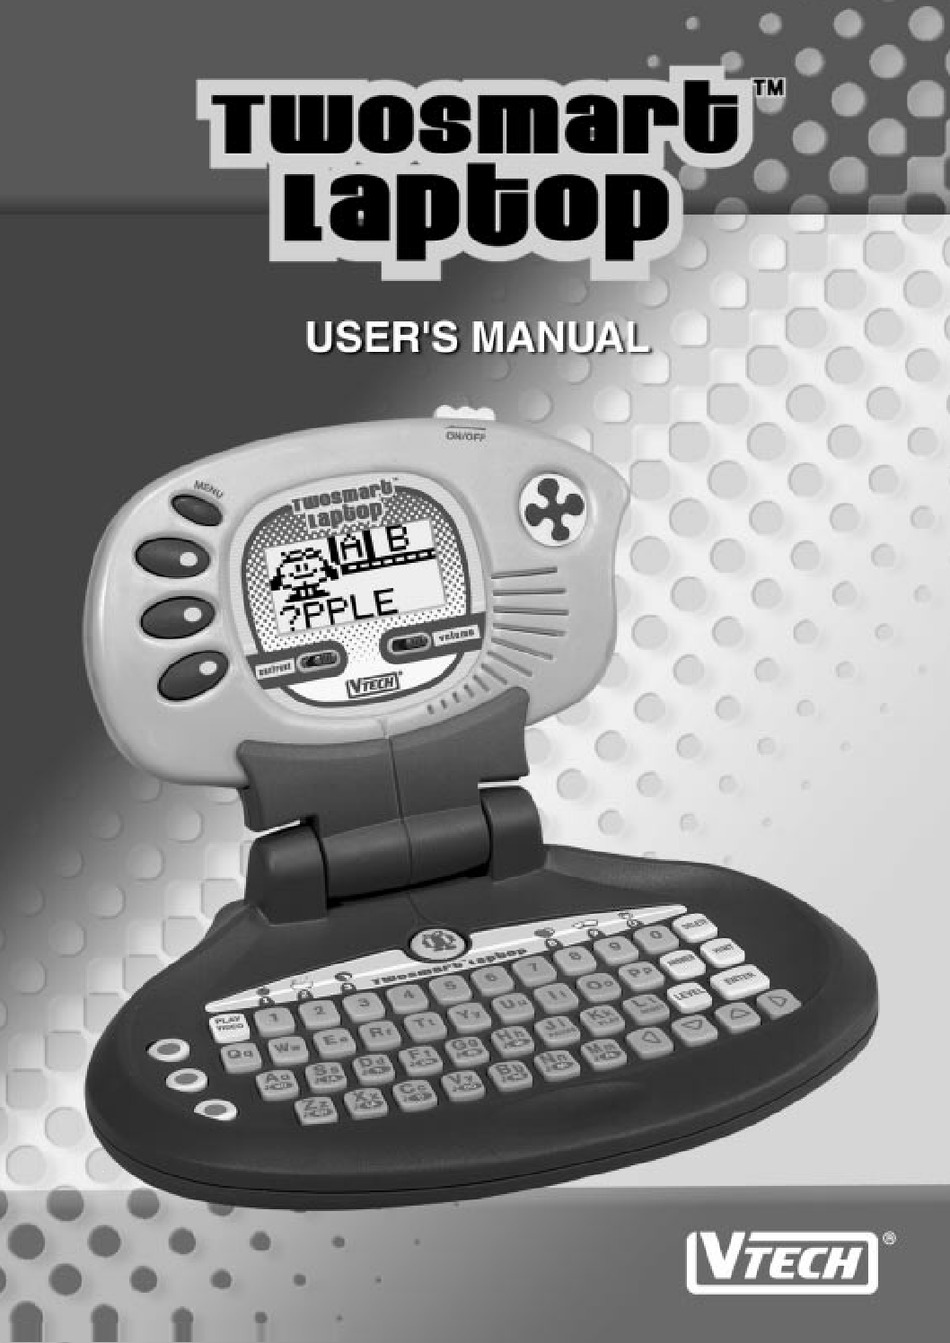 VTech Learning Laptop User manual : Free Download, Borrow, and